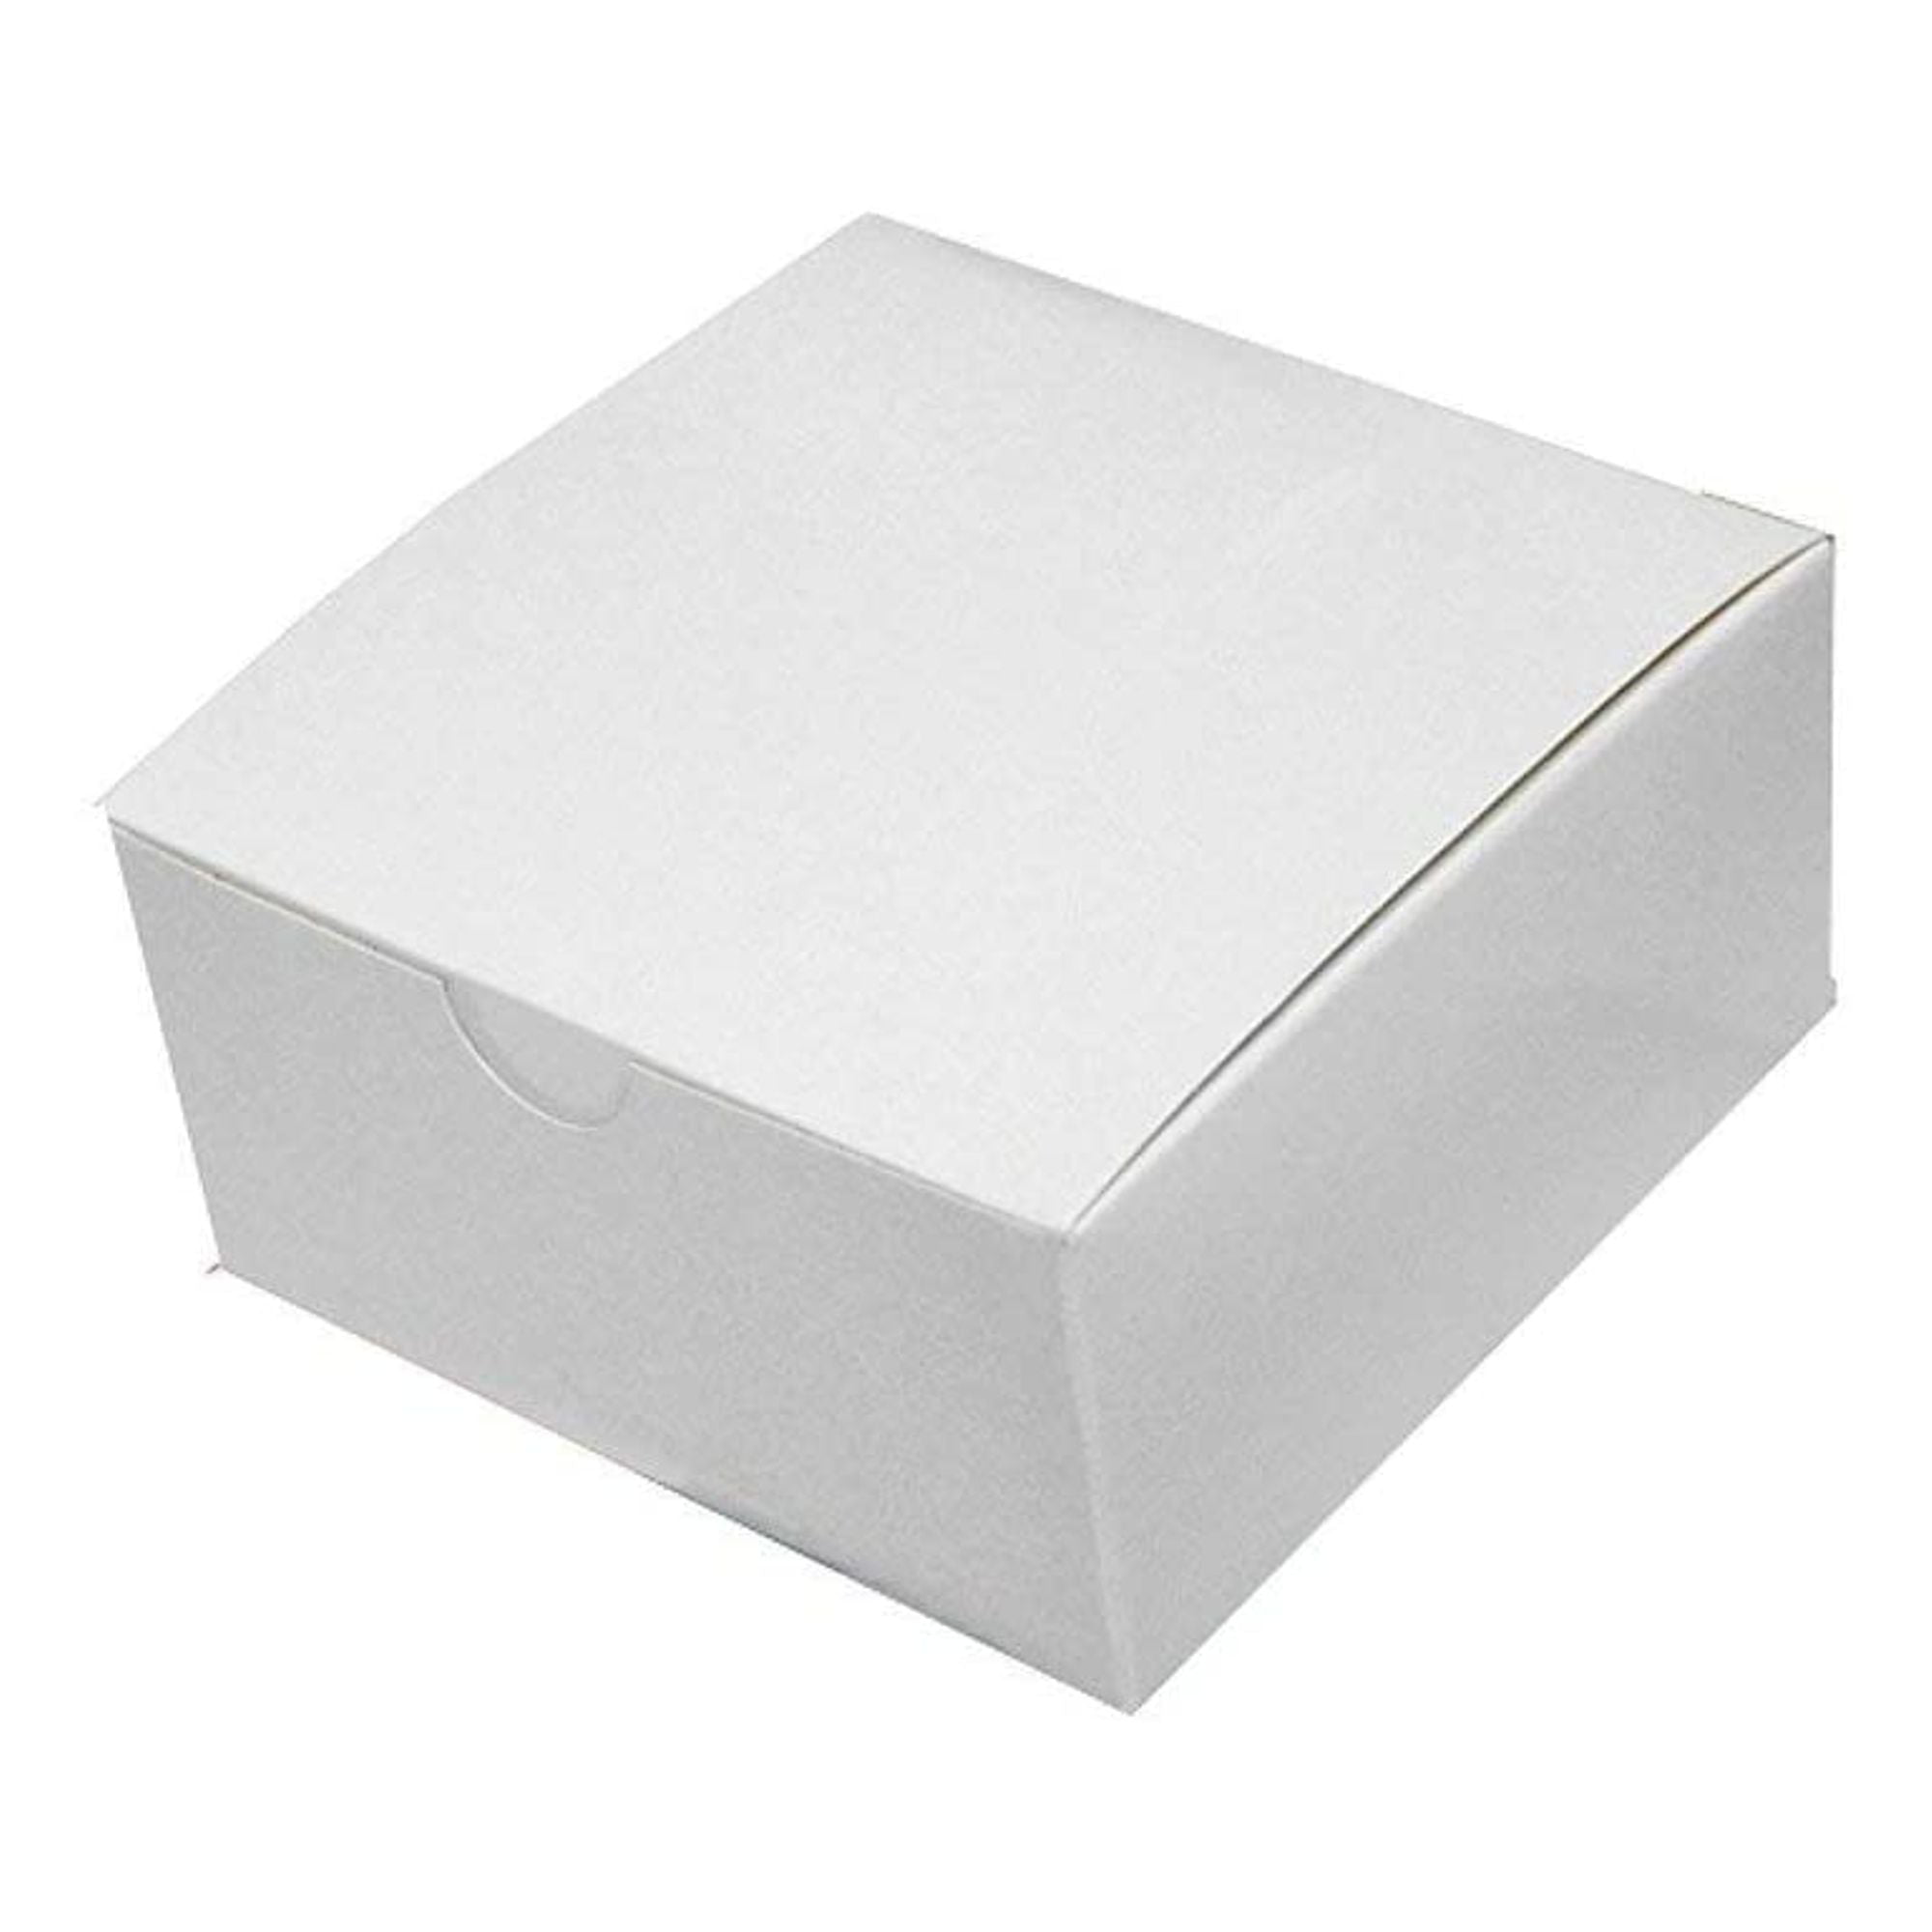 2 DEEP ROBE BOXES ~ ALL OCCASION WHITE GIFT BOXES ~ 17"L X 11"W X 3-1/2"H  ~ NEW 